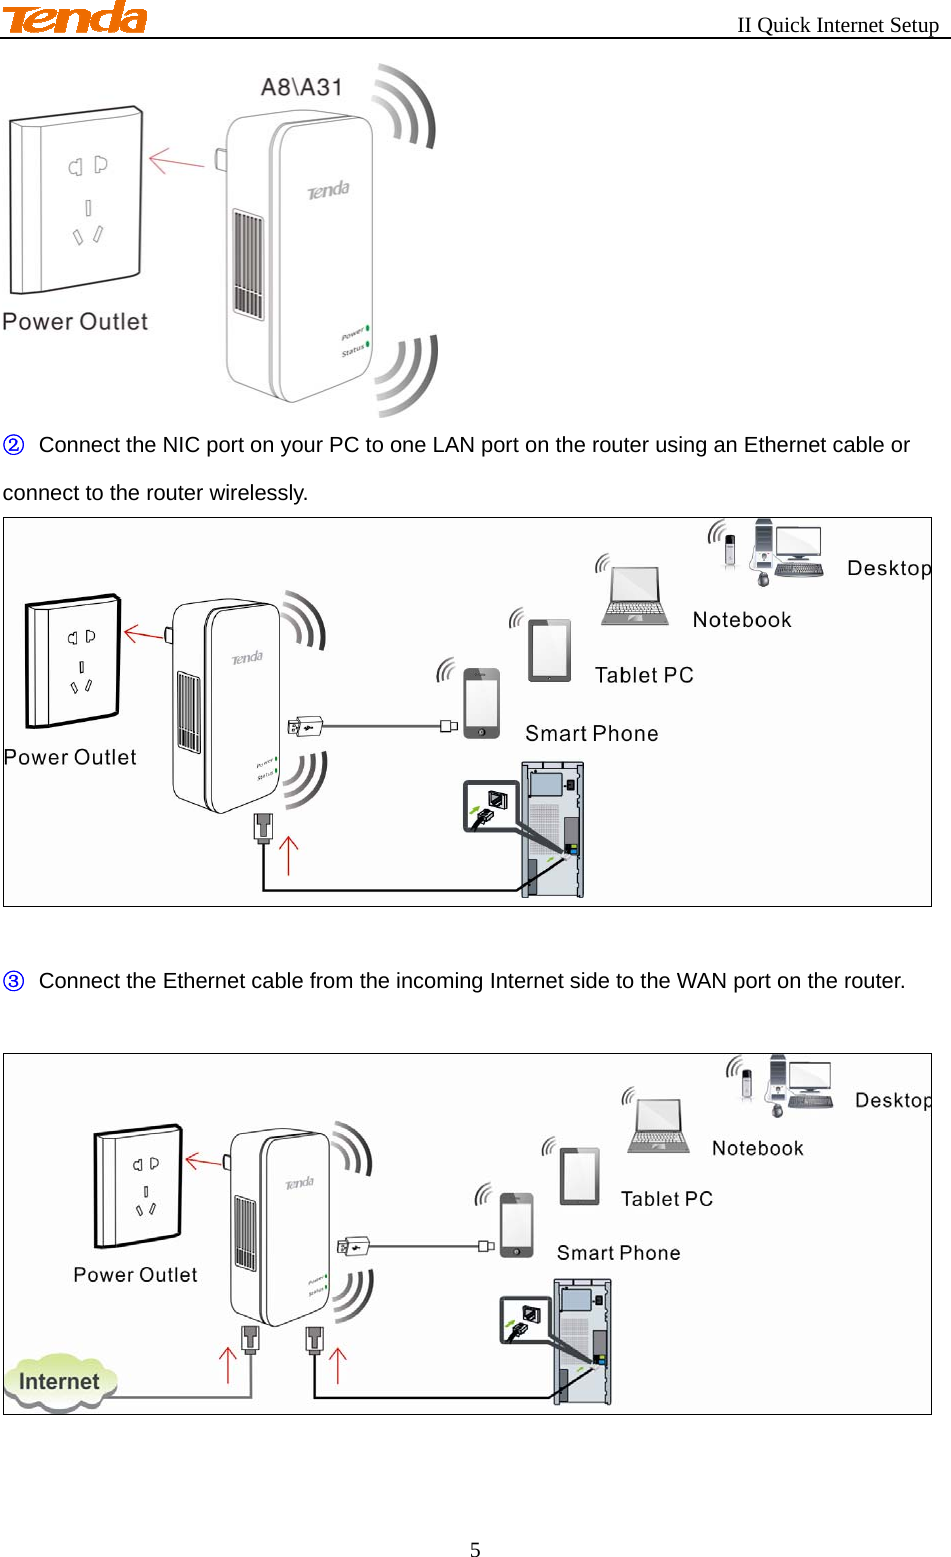                                                       II Quick Internet Setup 5  ②   Connect the NIC port on your PC to one LAN port on the router using an Ethernet cable or connect to the router wirelessly.   ③   Connect the Ethernet cable from the incoming Internet side to the WAN port on the router.   